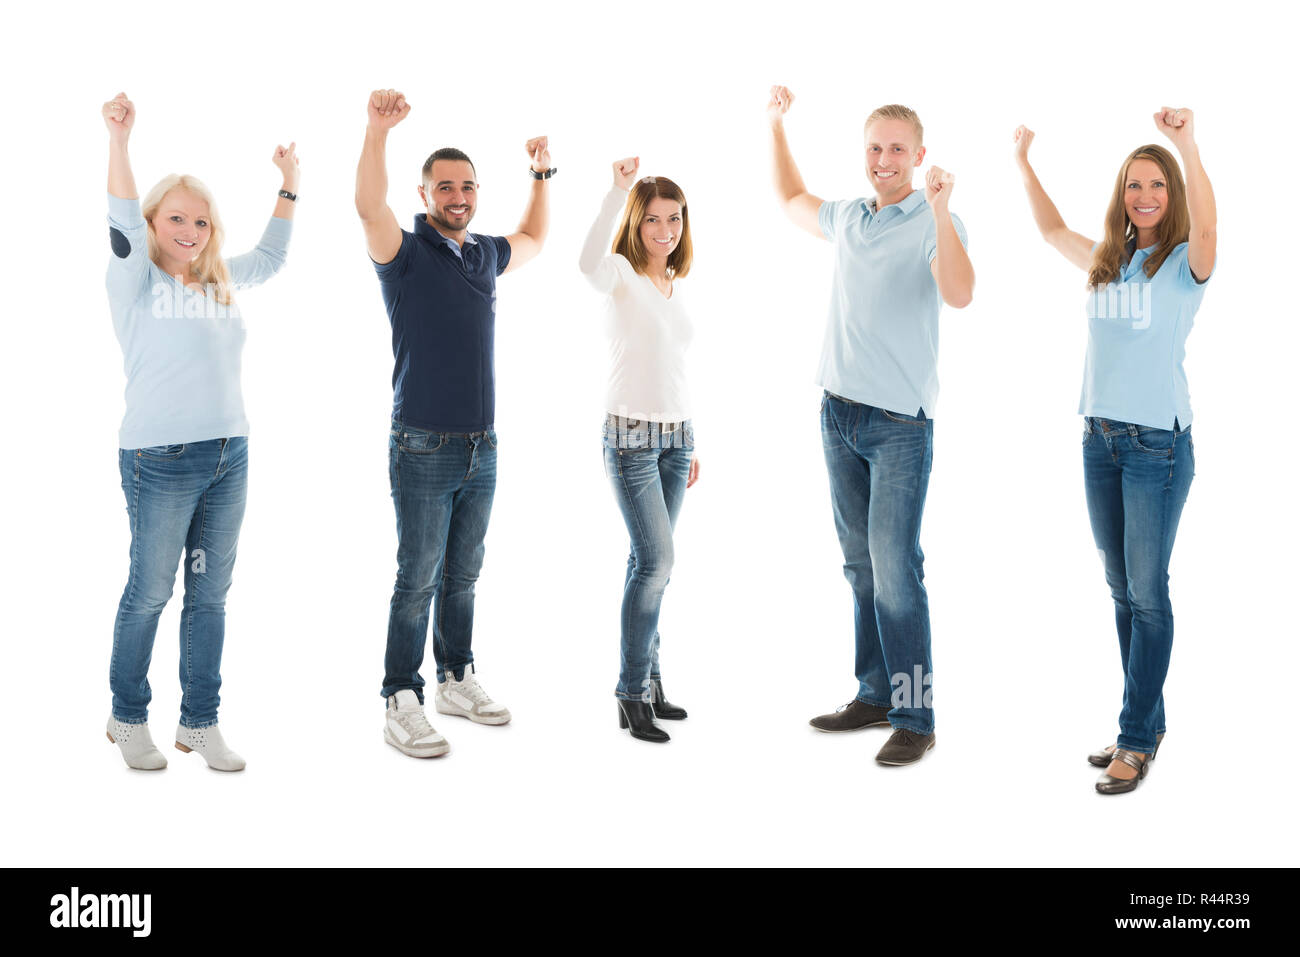 Confident People In Casuals Standing With Arms Raised Stock Photo